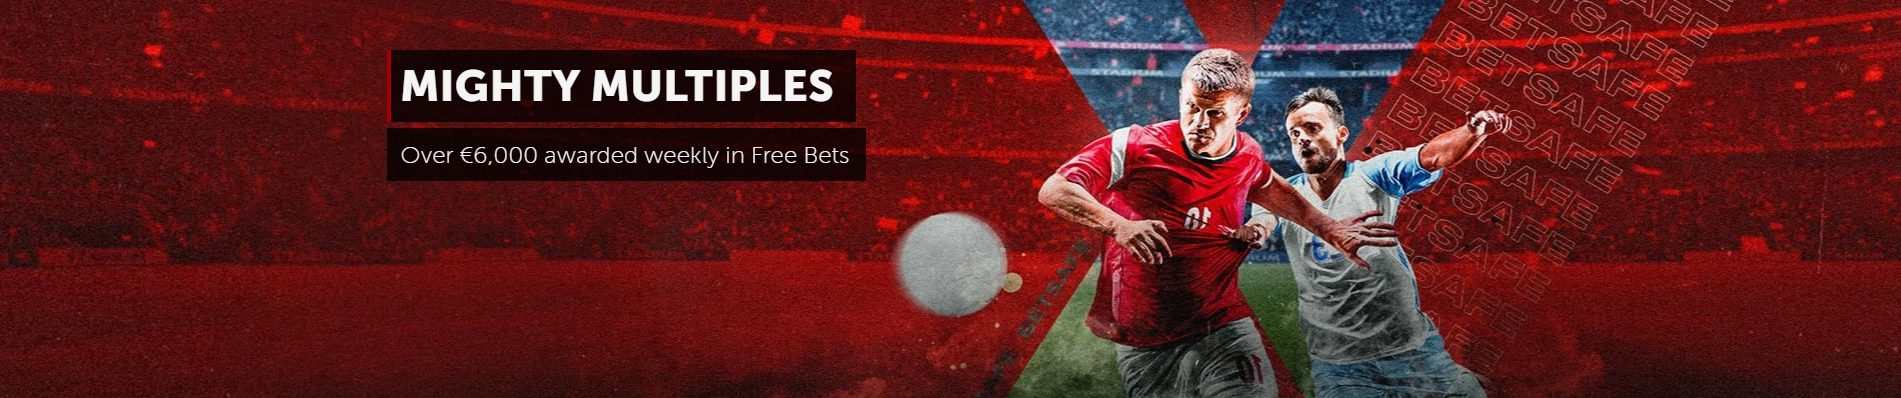 bookmaker betsafe mighty multimples offer